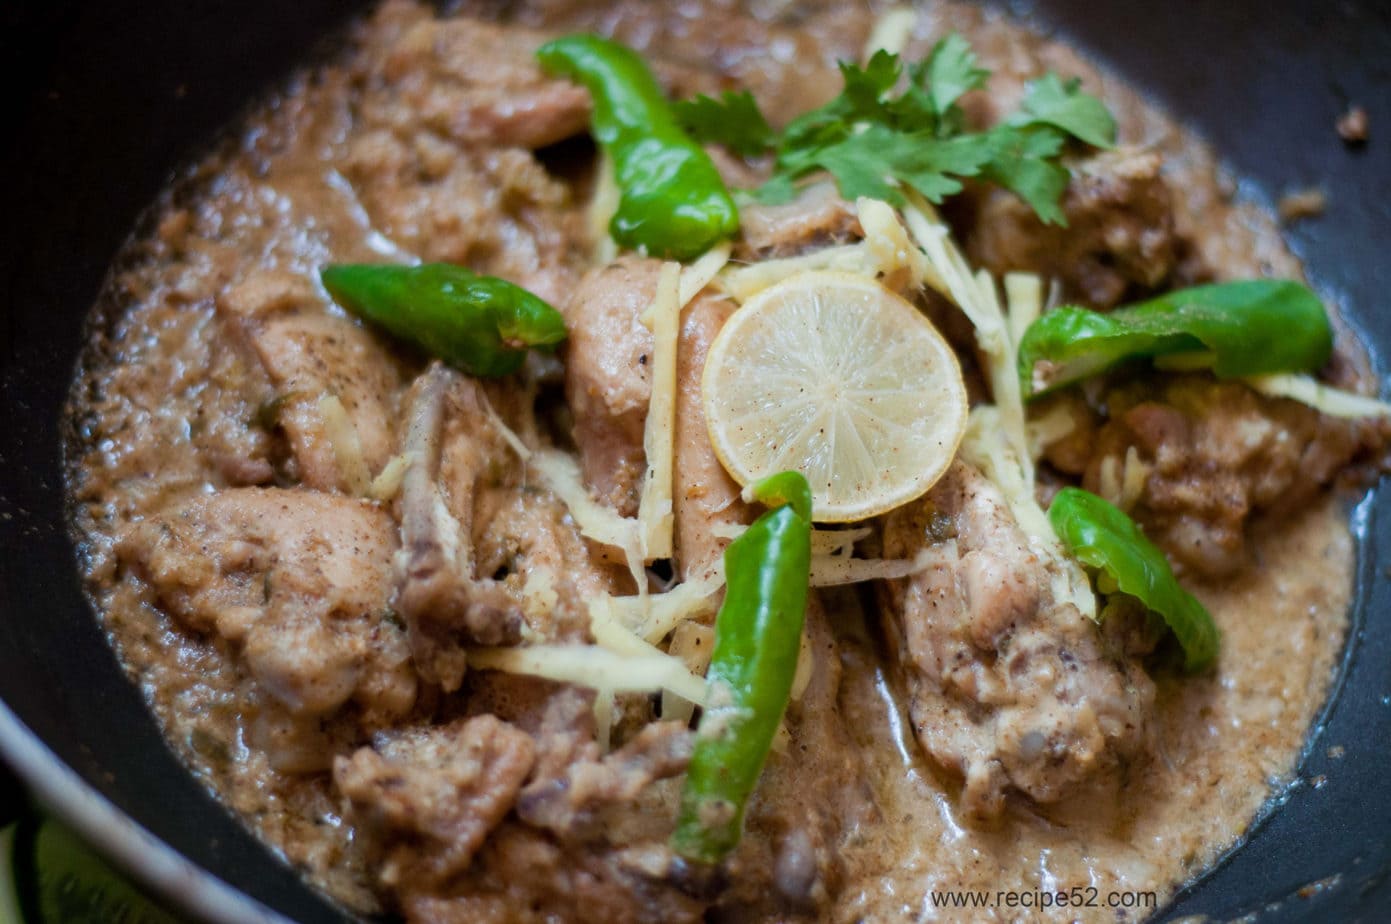 A close up shot of chicken white karahi garnished with green chillies and a slice of lemon.